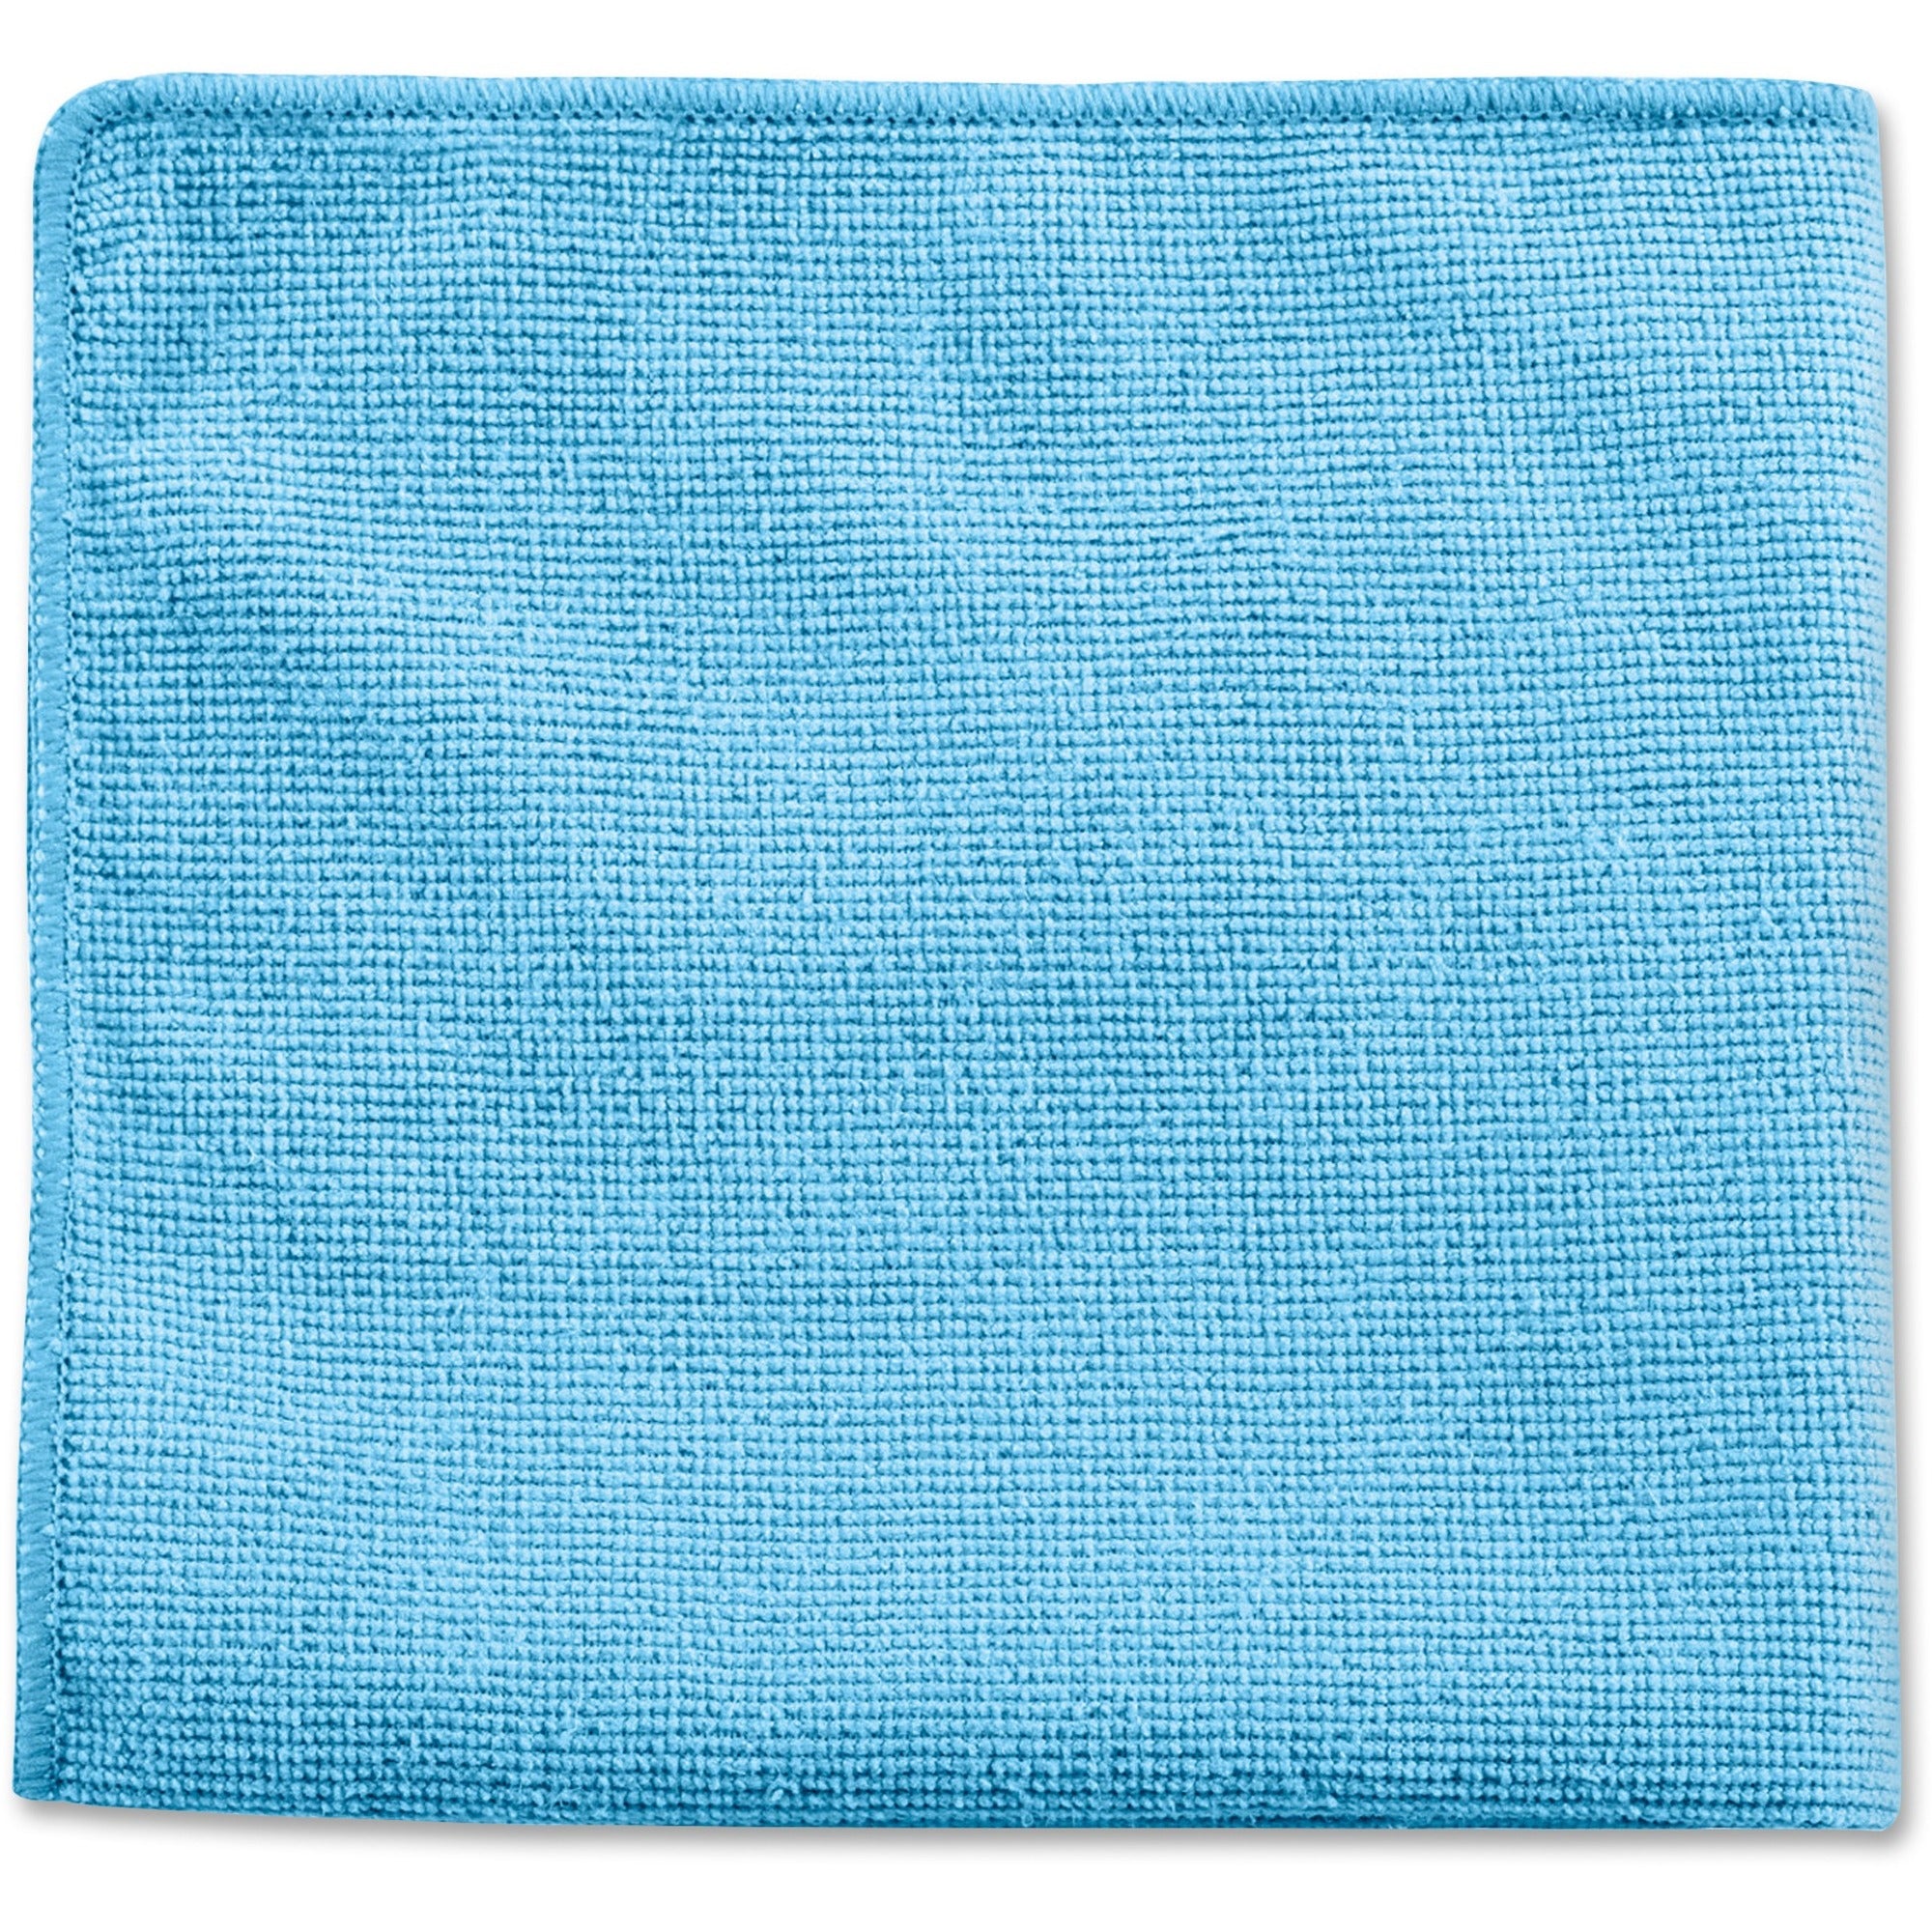 rubbermaid-commercial-blue-mf-cleaning-cloth-12-length-x-12-width-288-carton-reusable-bleach-safe-launderable-chemical-resistant-durable-blue_rcp1820579ct - 1